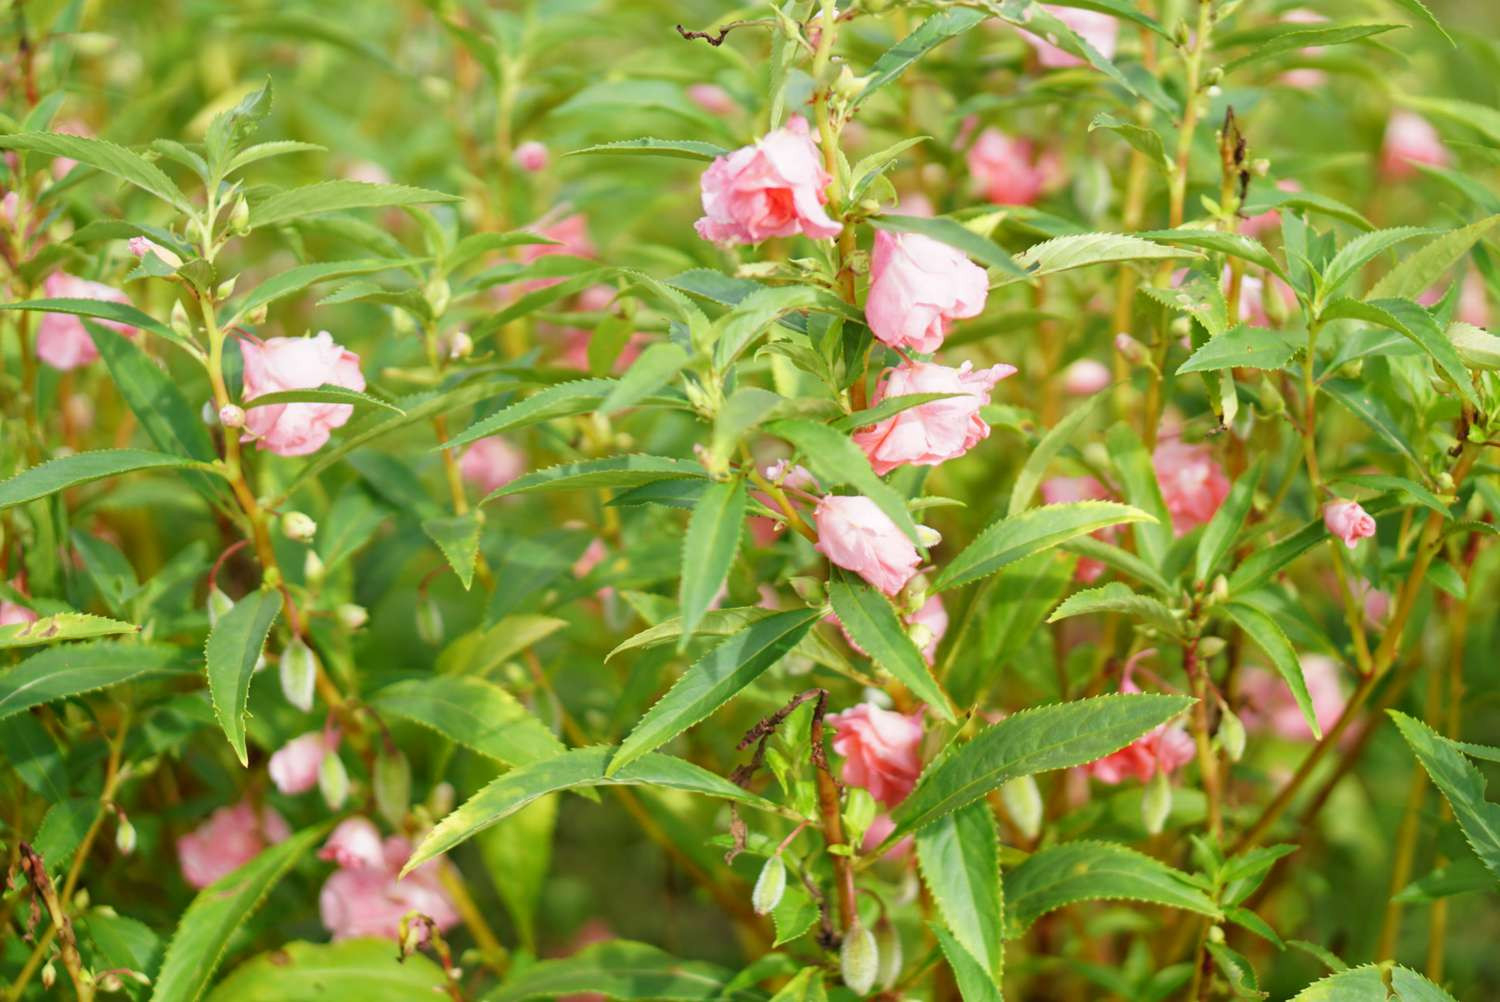 How To Grow And Care For Garden Balsam (Rose Balsam)